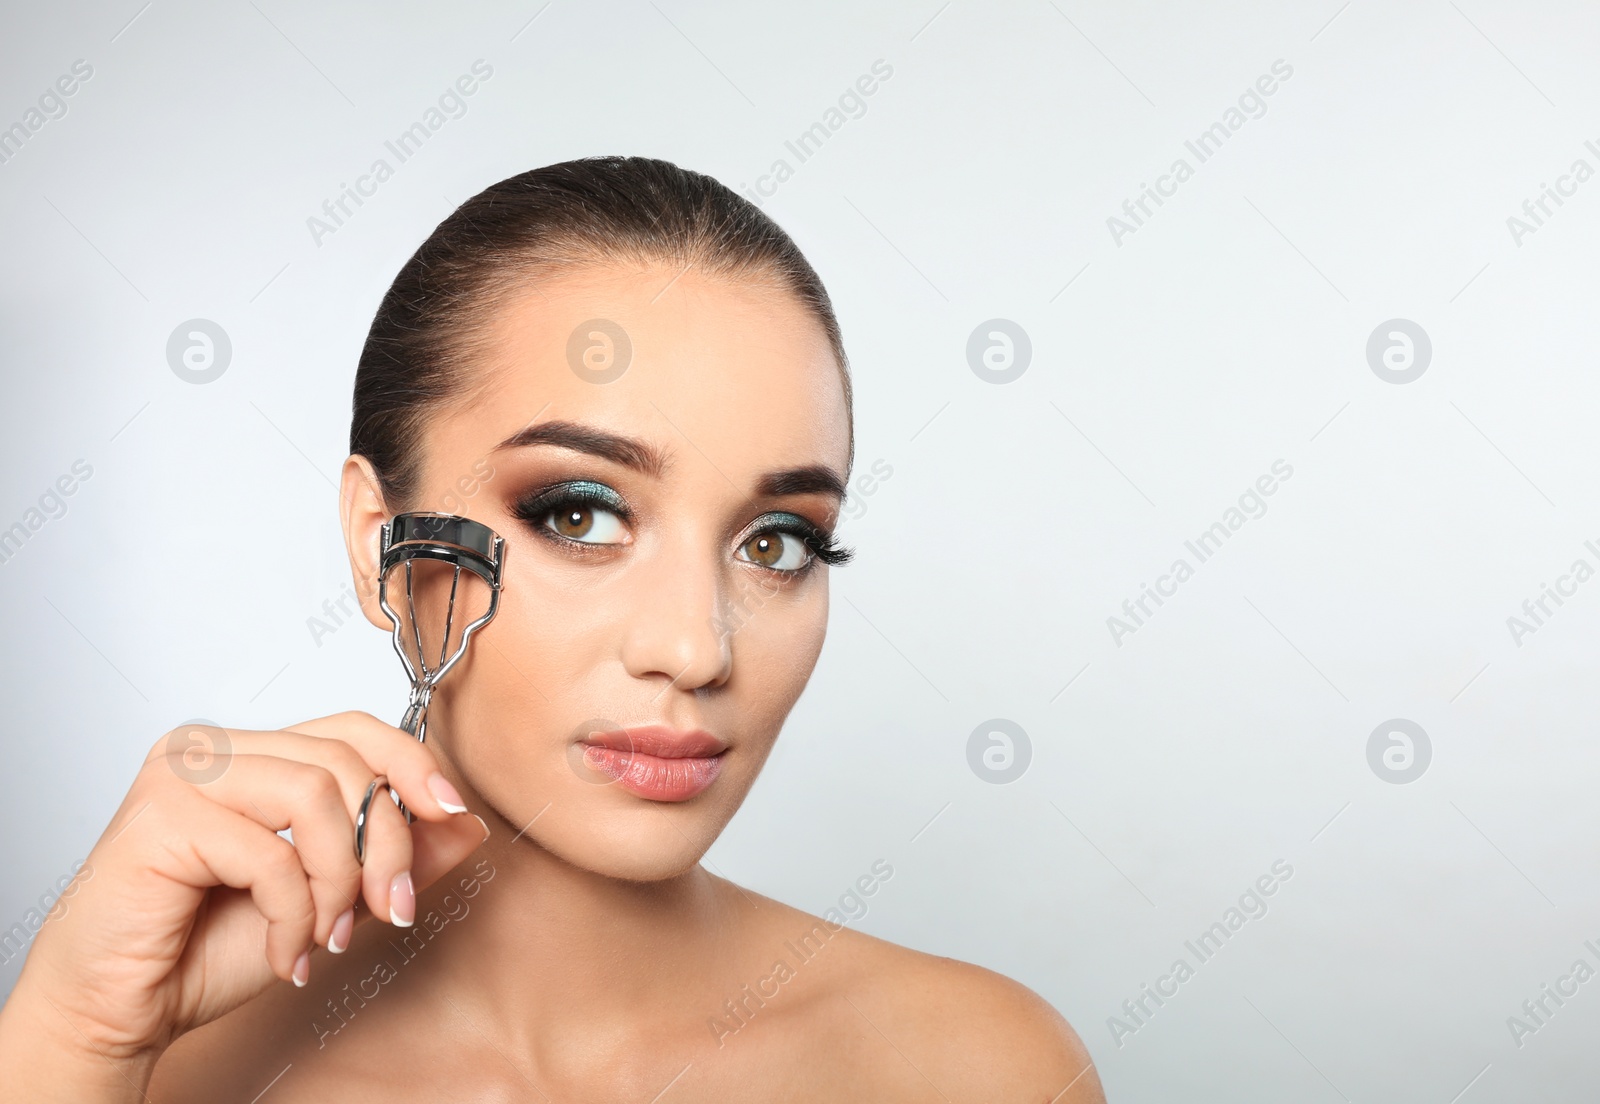 Photo of Portrait of young woman with eyelash extensions holding curler on light background. Space for text